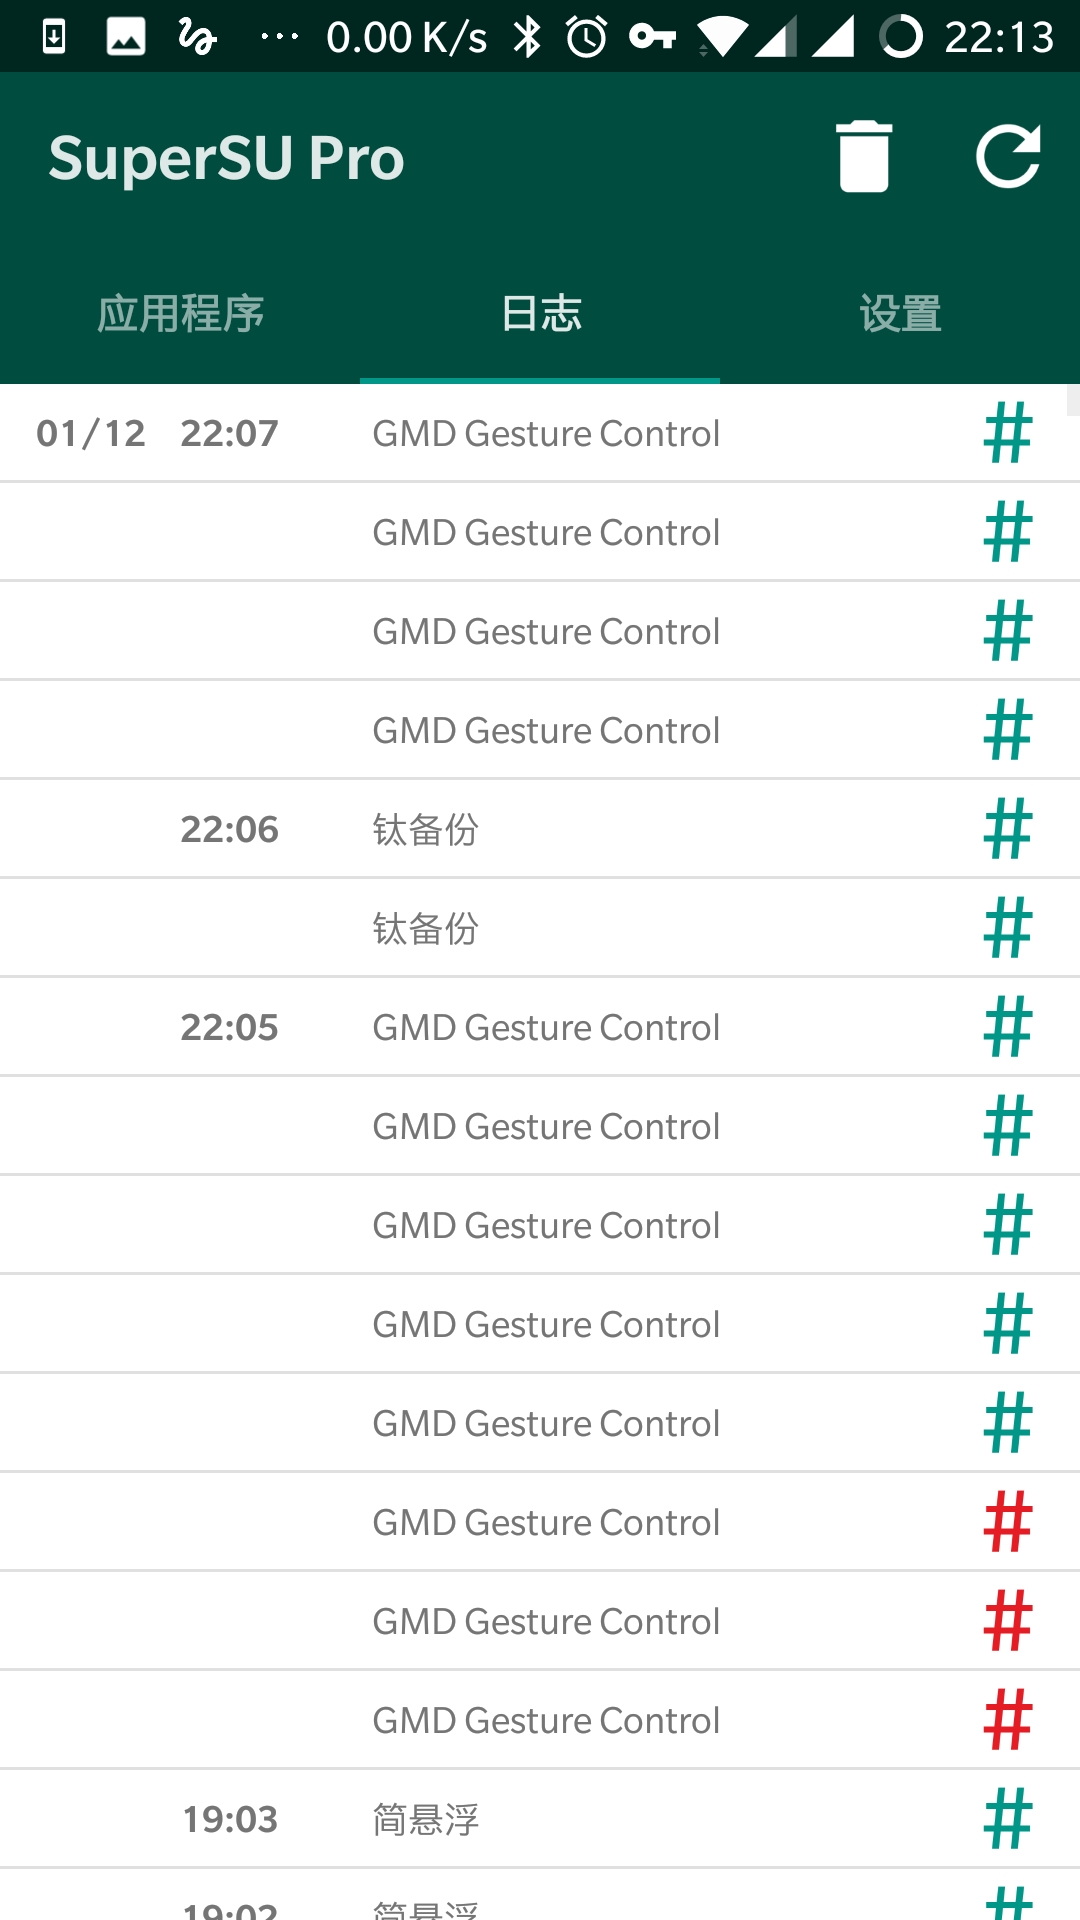 gmd gesture root request